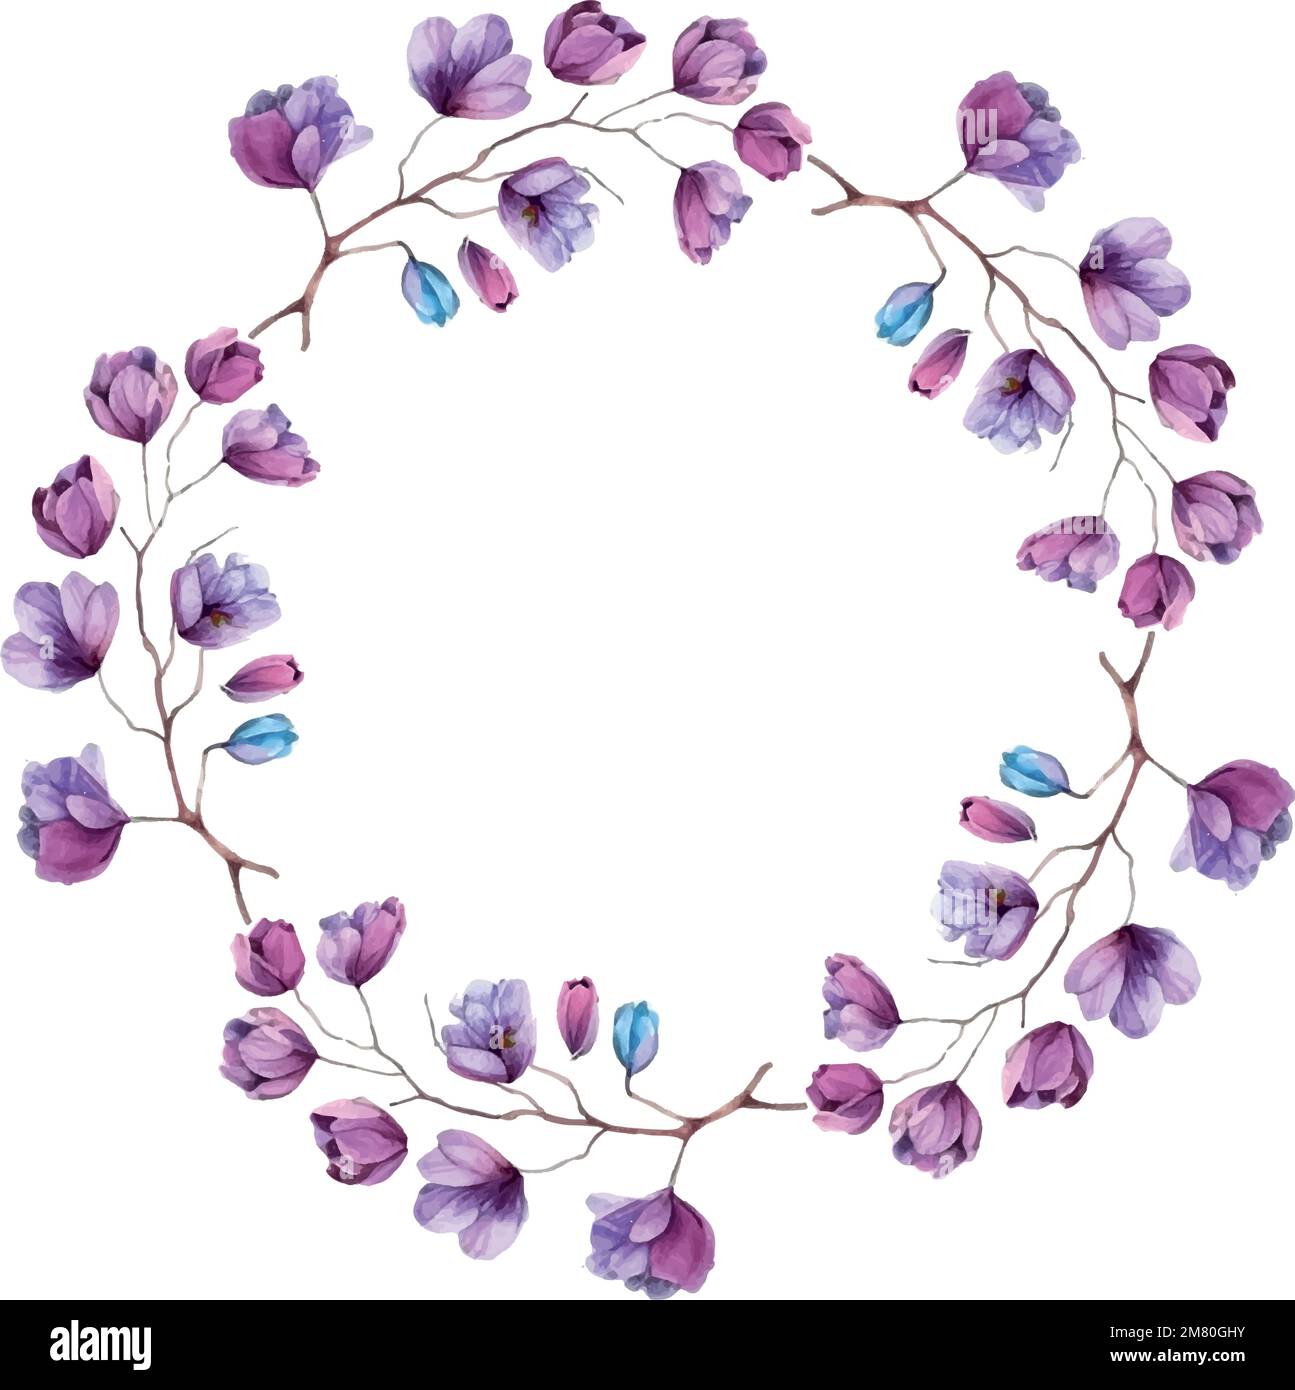 Watercolor sakura wreath. Natural round frame with blossom cherry tree branches. Hand drawn japanese flowers illustration on white background Stock Vector